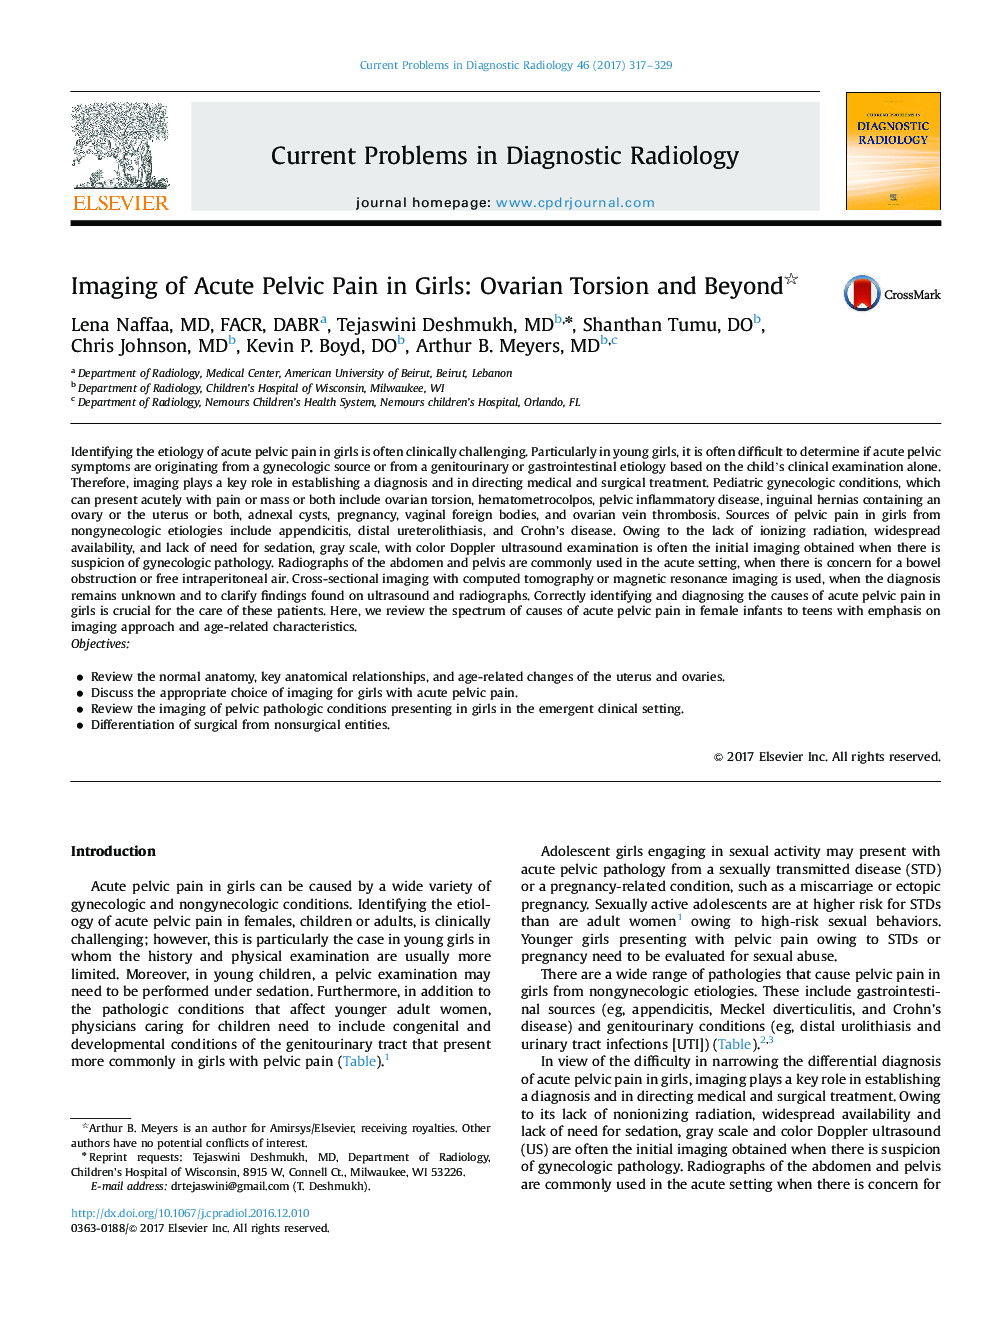 Imaging of Acute Pelvic Pain in Girls: Ovarian Torsion and Beyond